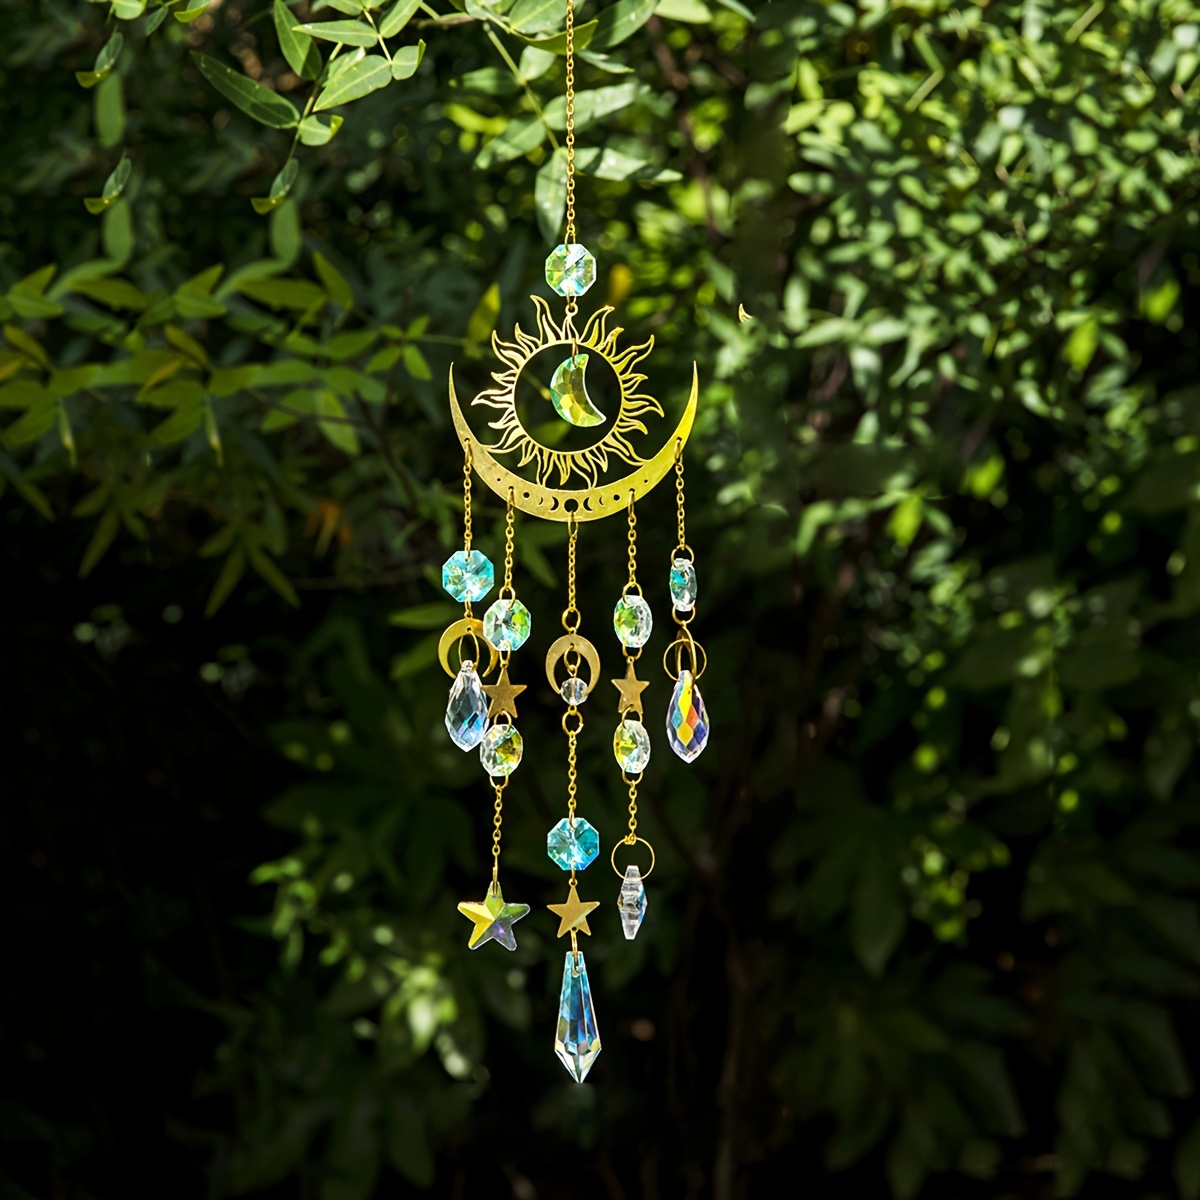 

1pc, Sun And Moon Crystal Wind Chime, Classic Style, Glass Suncatcher, Garden Decor Pendant, Home Decor, Outdoor Hanging Ornament